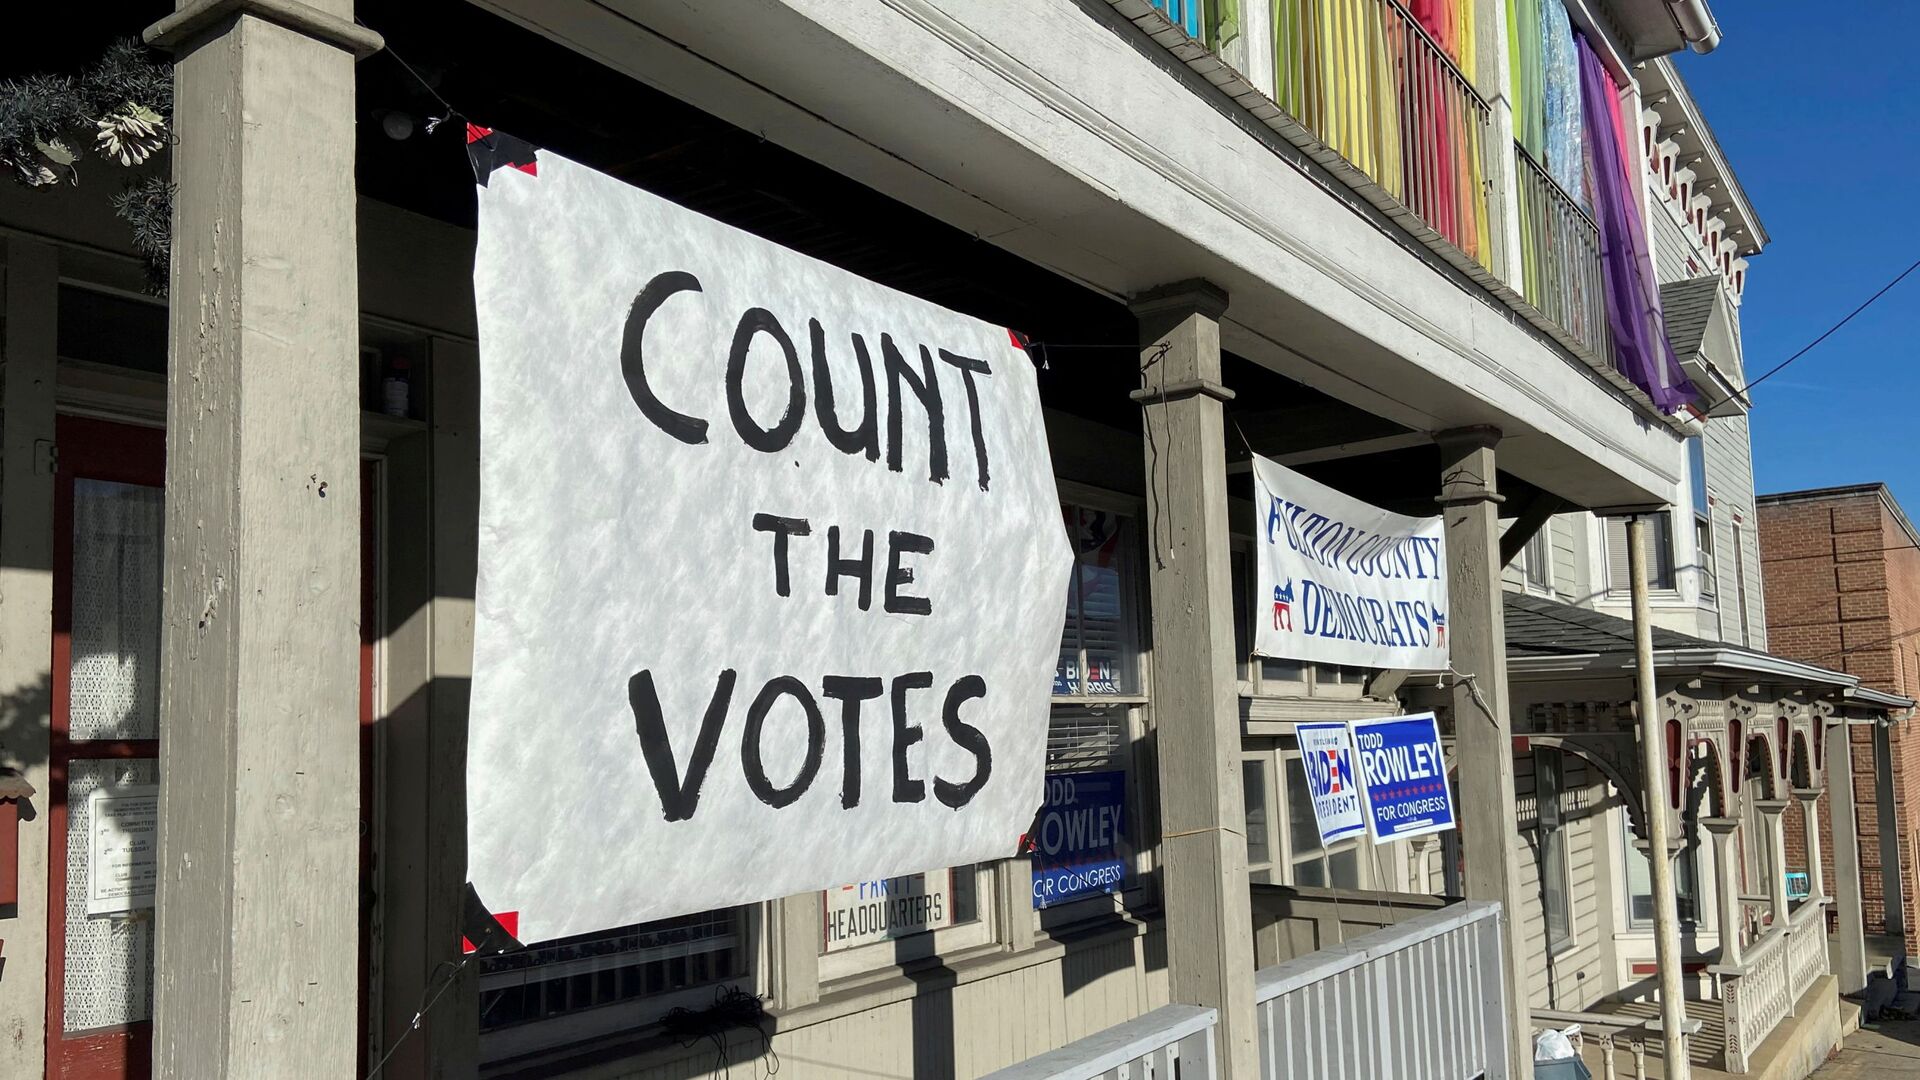 A sign urging people to vote is seen on the porch of the Democratic Party's Fulton County headquarters on Election Day in McConnellsburg, Pennsylvania November 3, 2020. Picture taken November 3, 2020. - Sputnik International, 1920, 26.10.2021